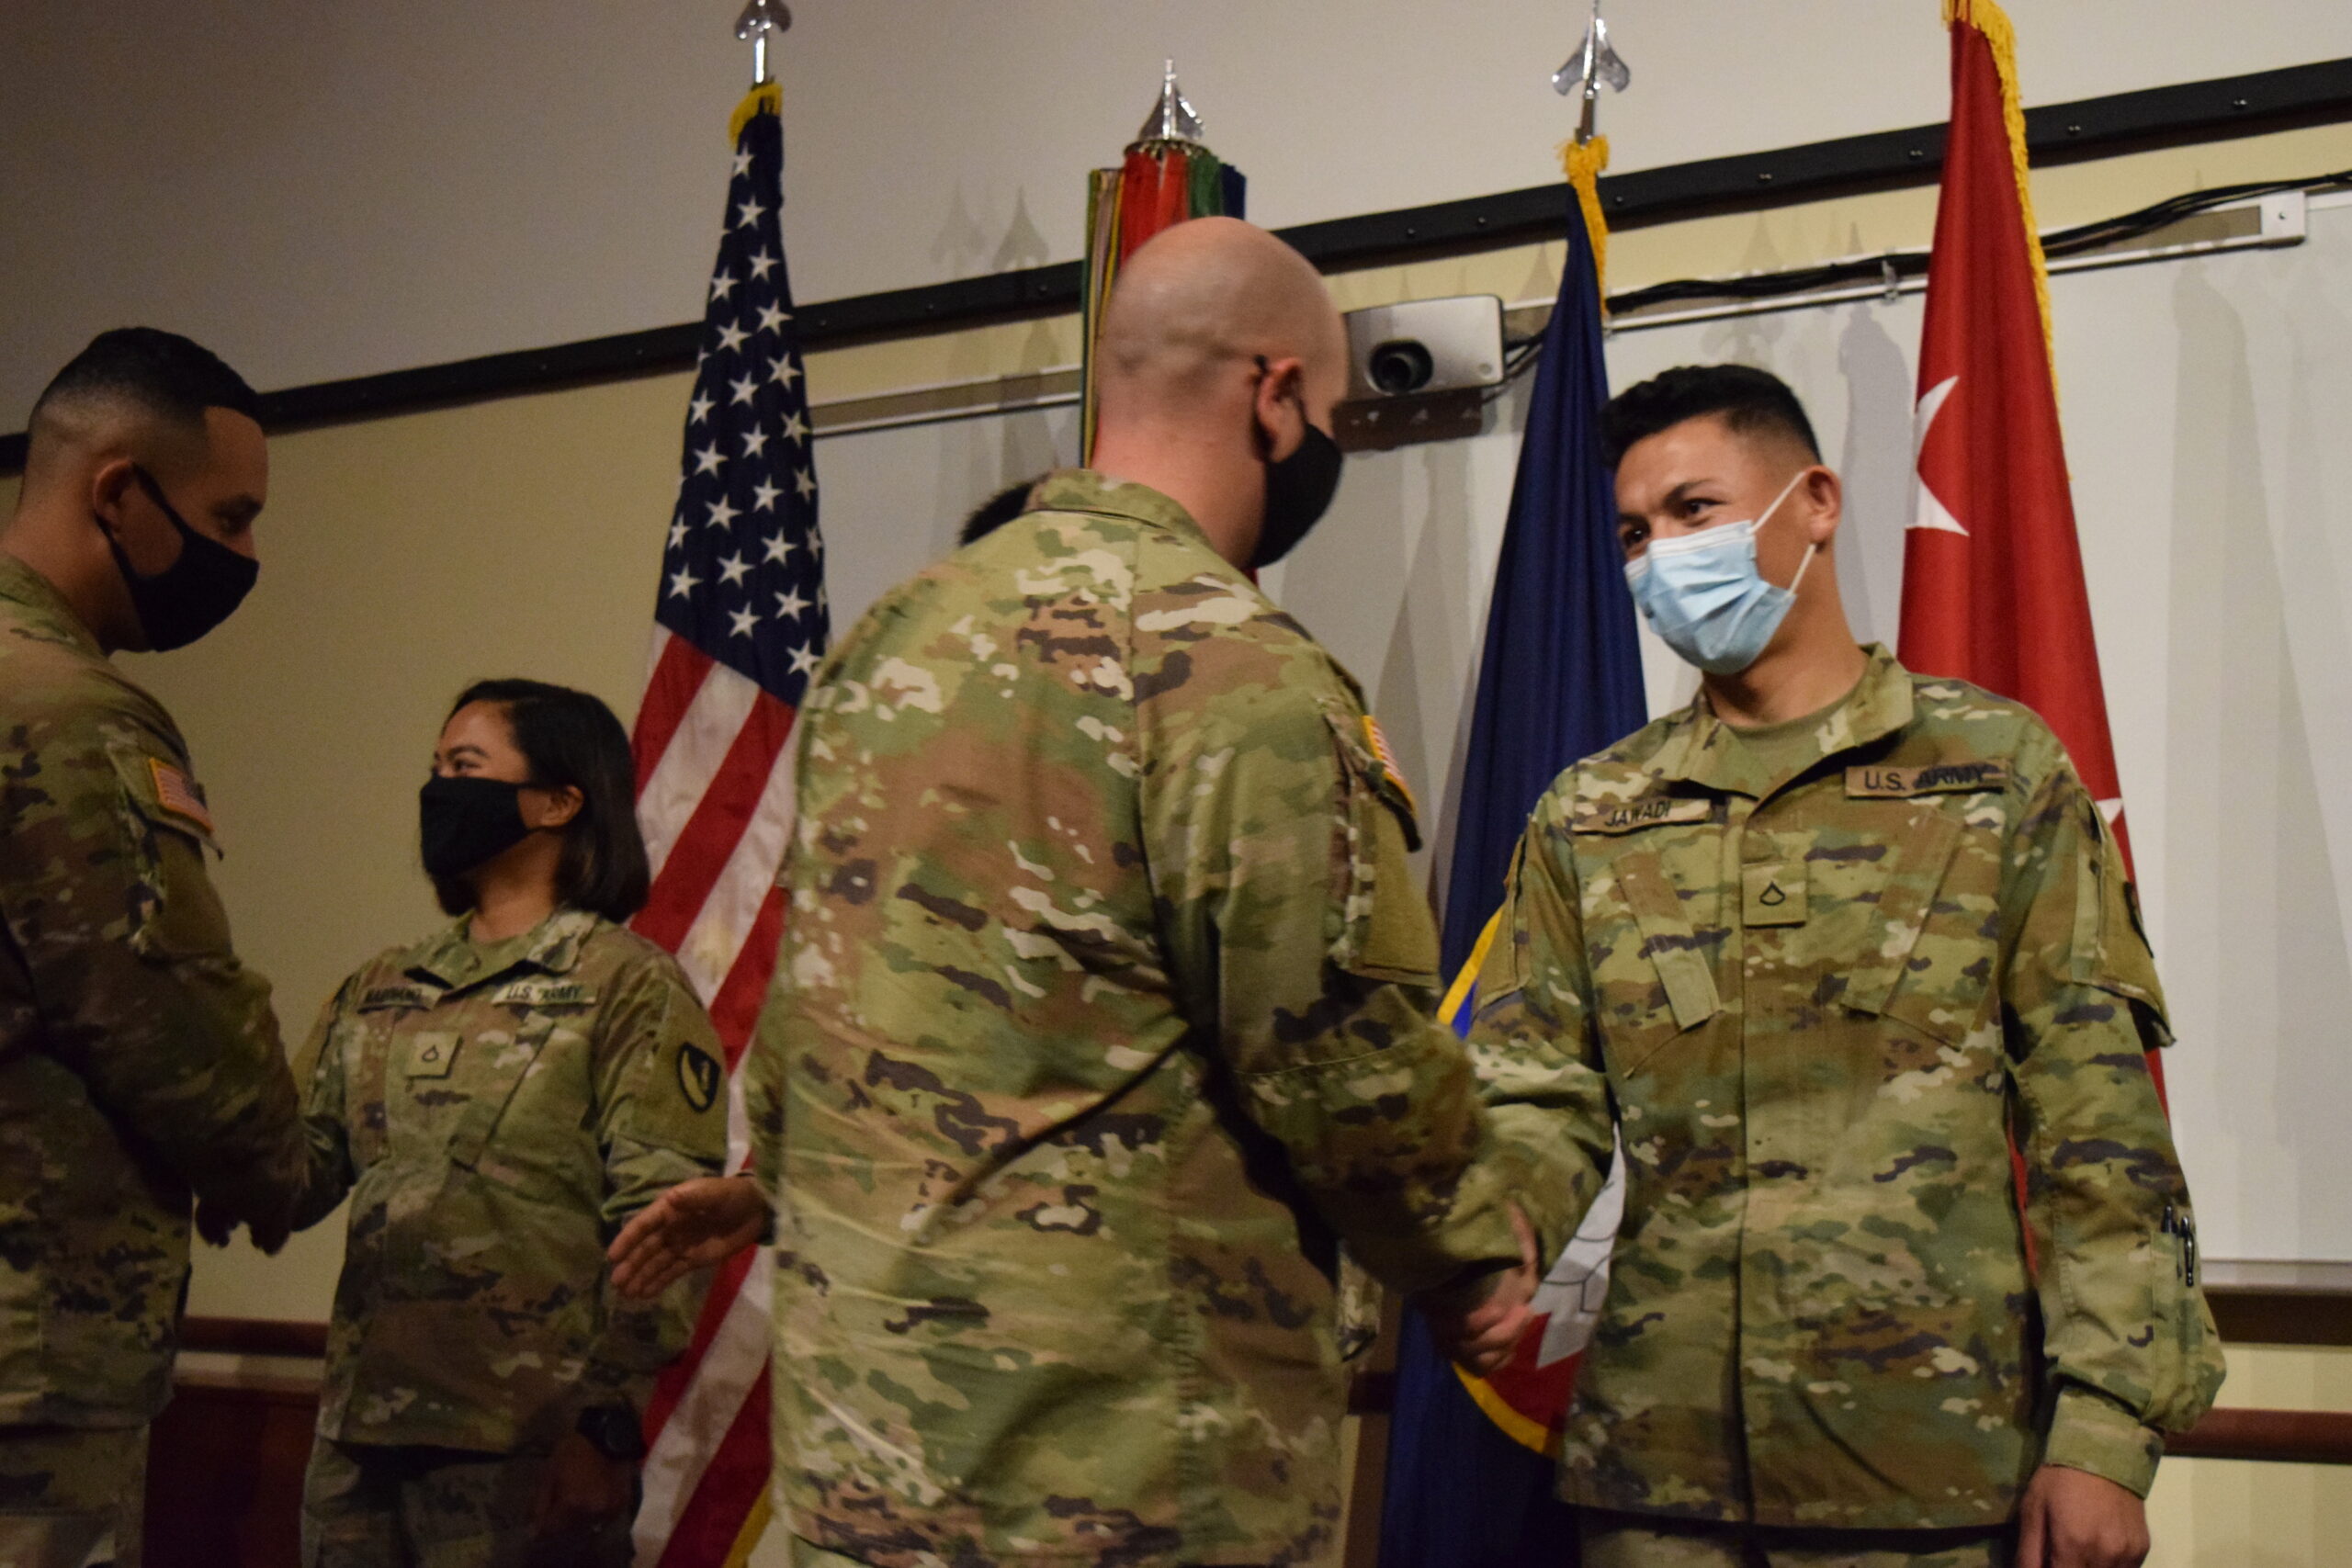 New U.S. citizens are congratulated by fellow soldiers